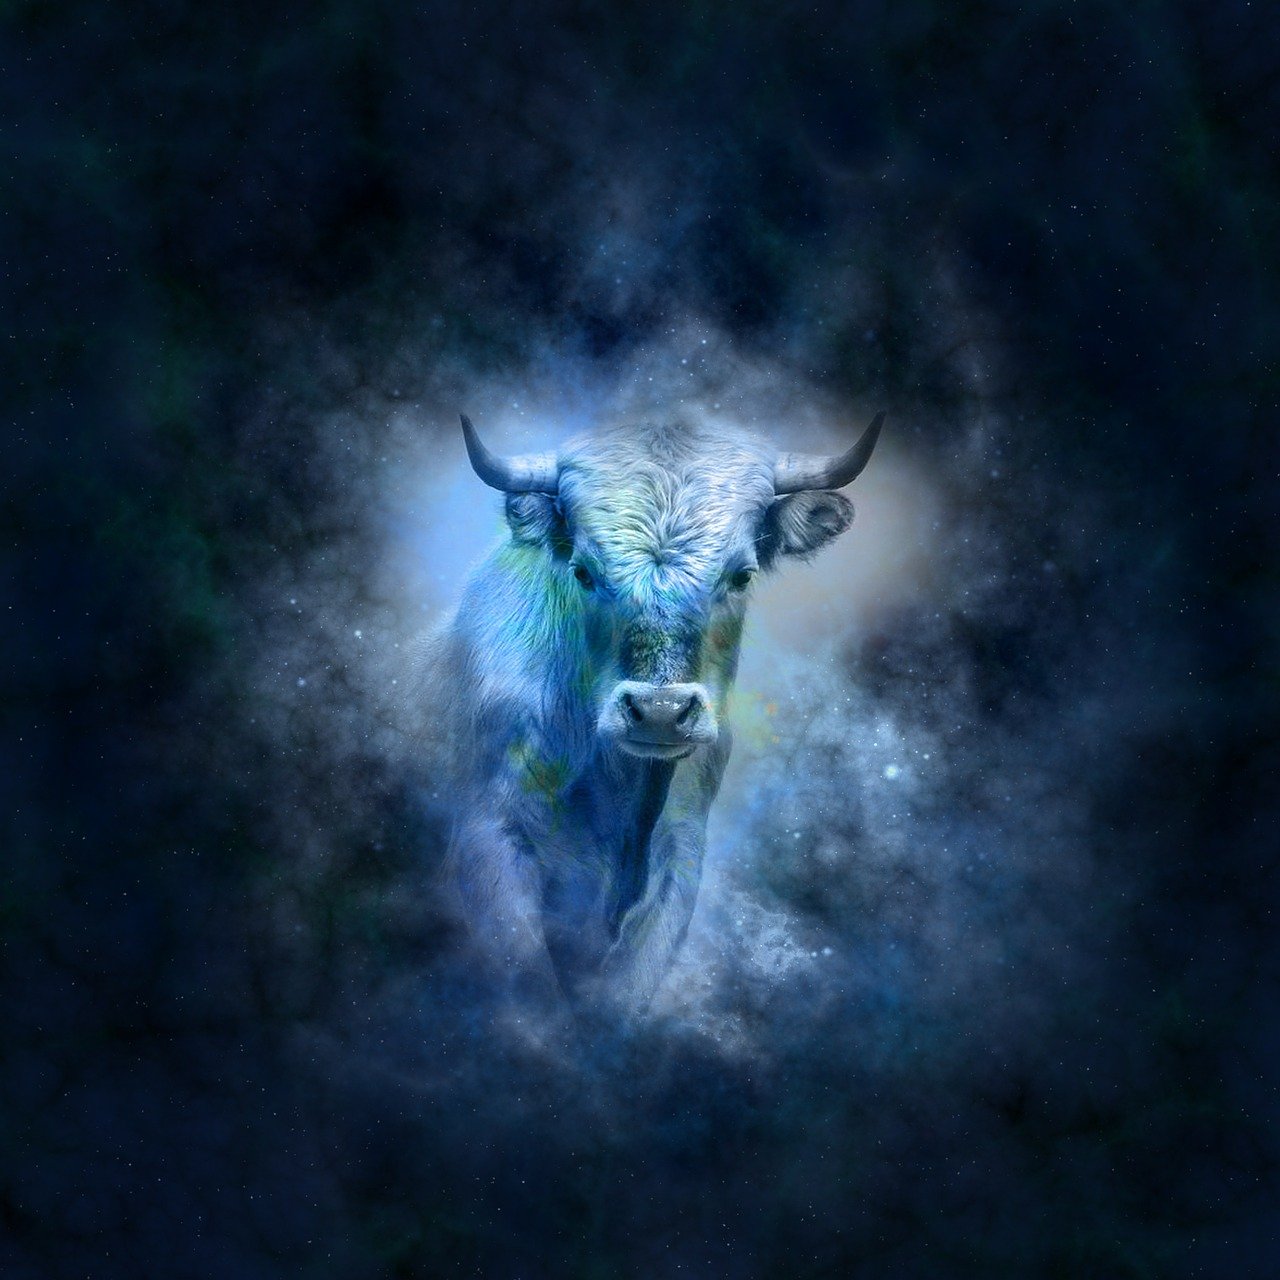 An illustration of the Zodiac sign for Taurus | Photo: Pixabay